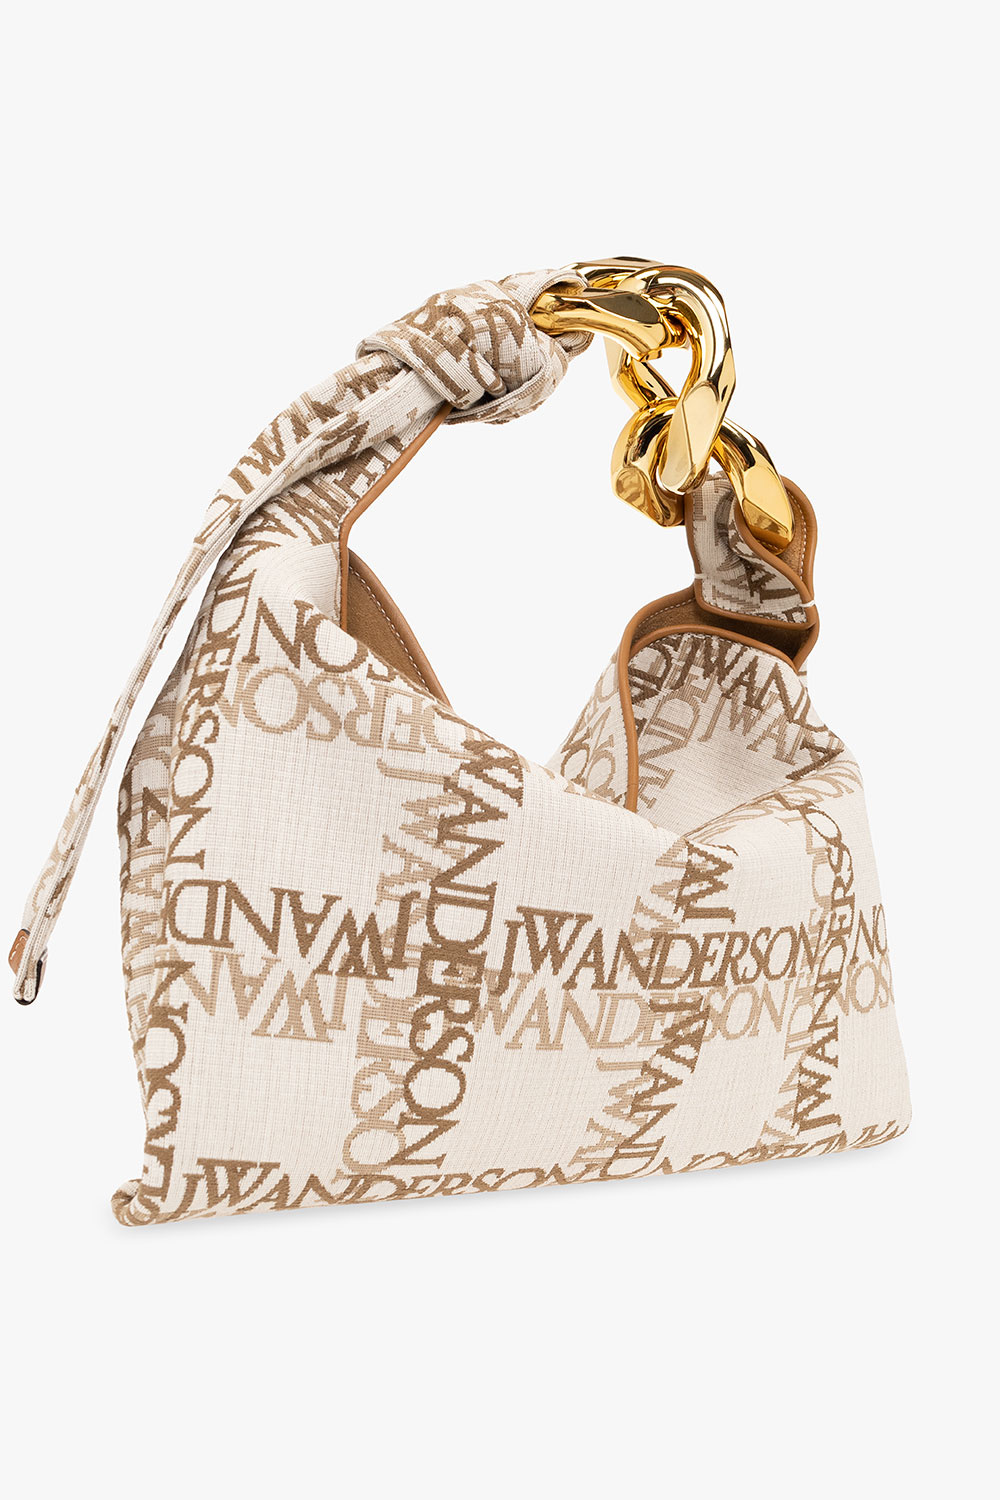 JW Anderson Chain Strap Small Cabas Bag in Light Beige – Hampden